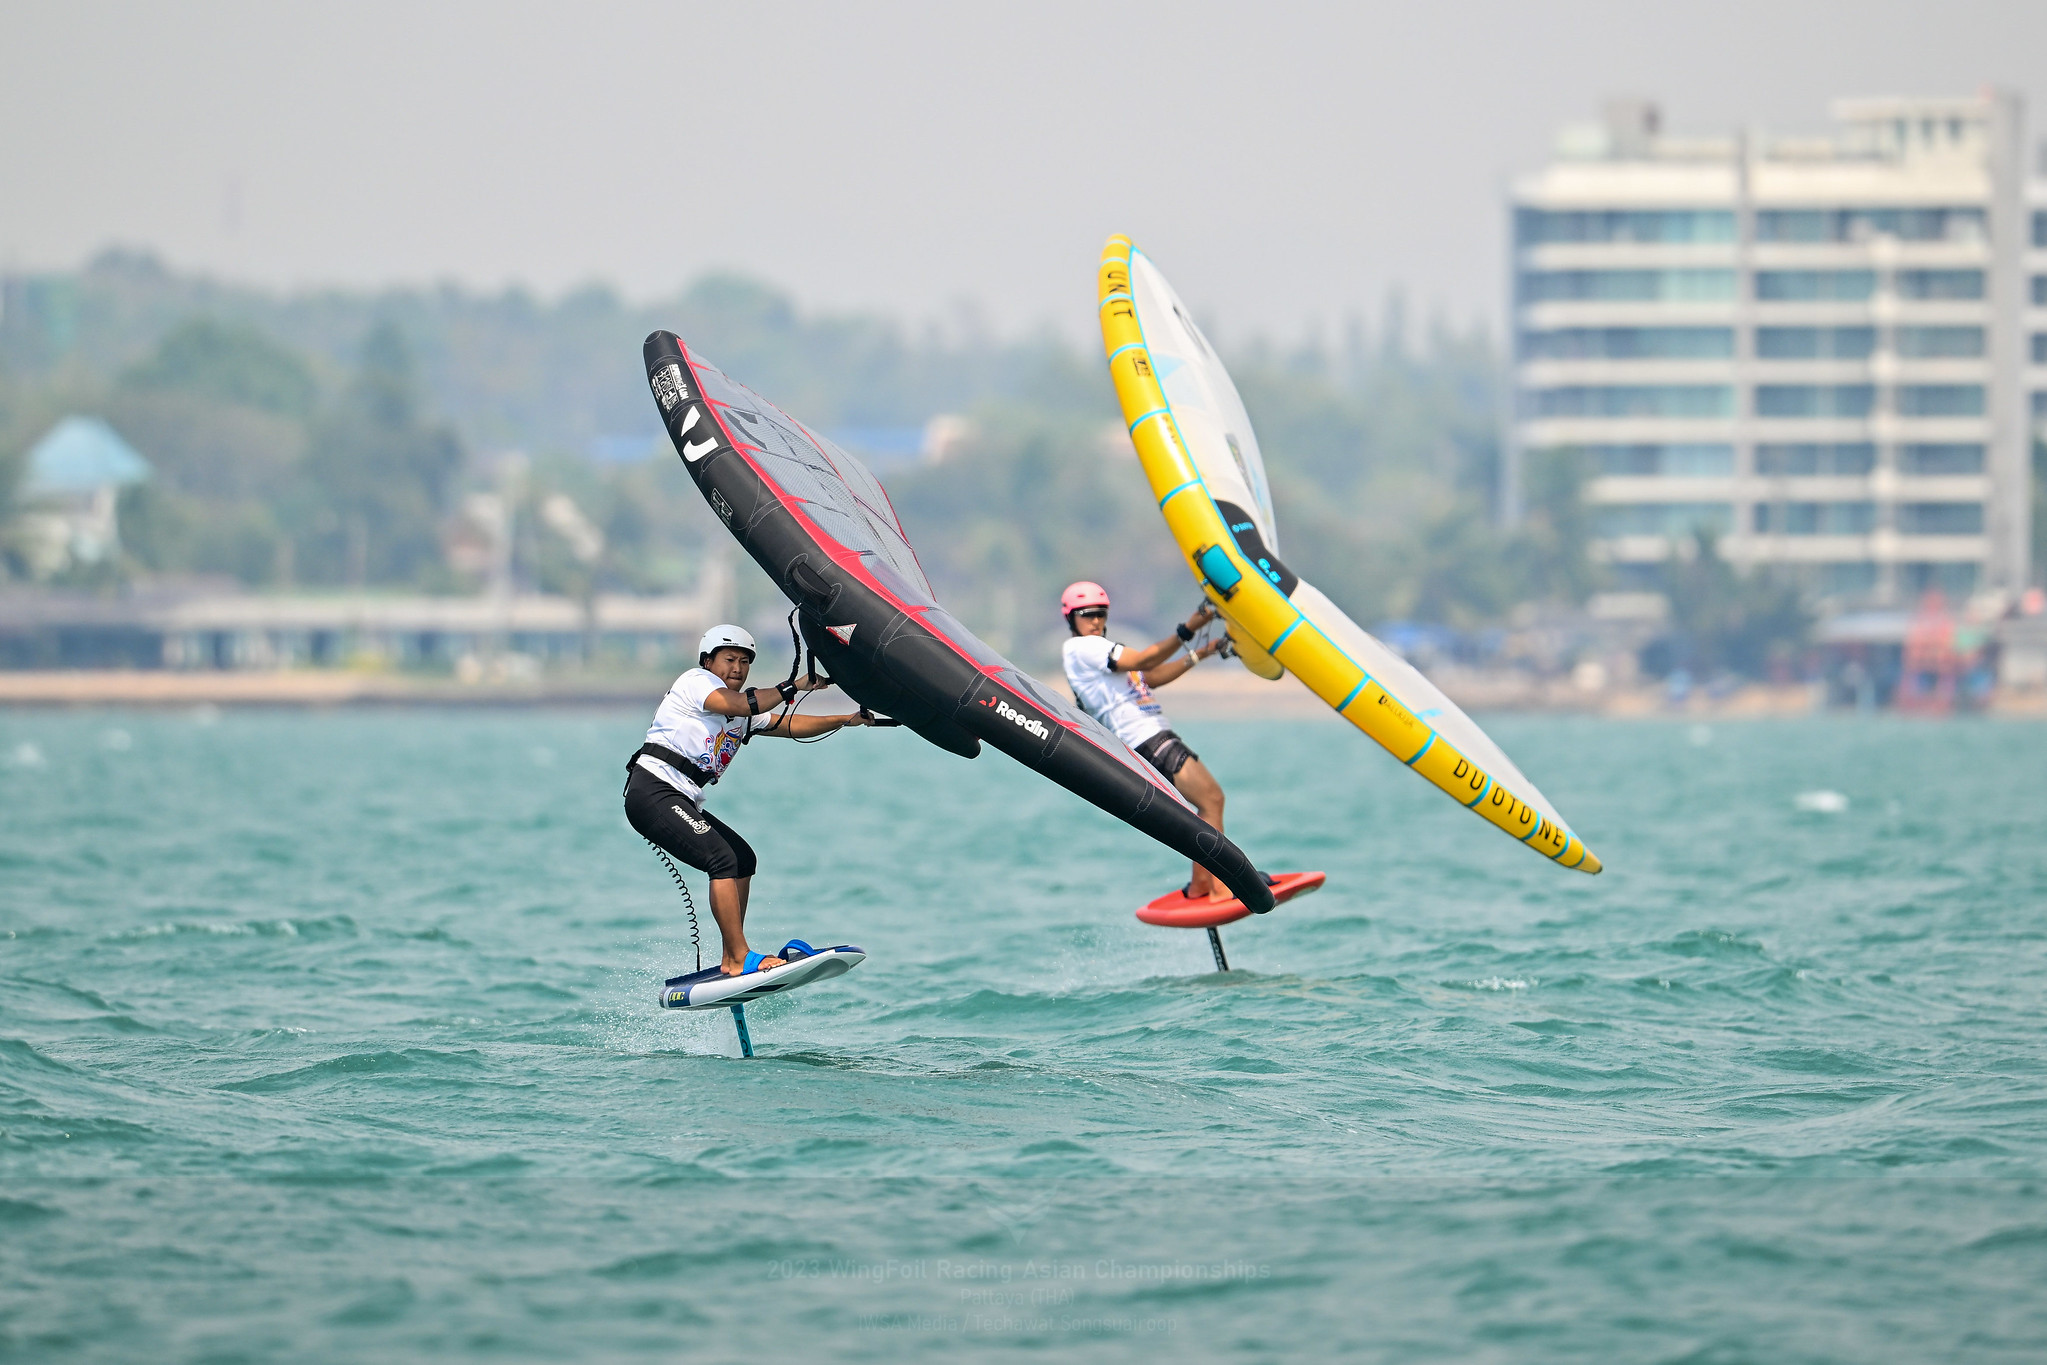 20230302_TH_Wingfoil_Asian_Day3_TS01533 - 2023 Asian Championships